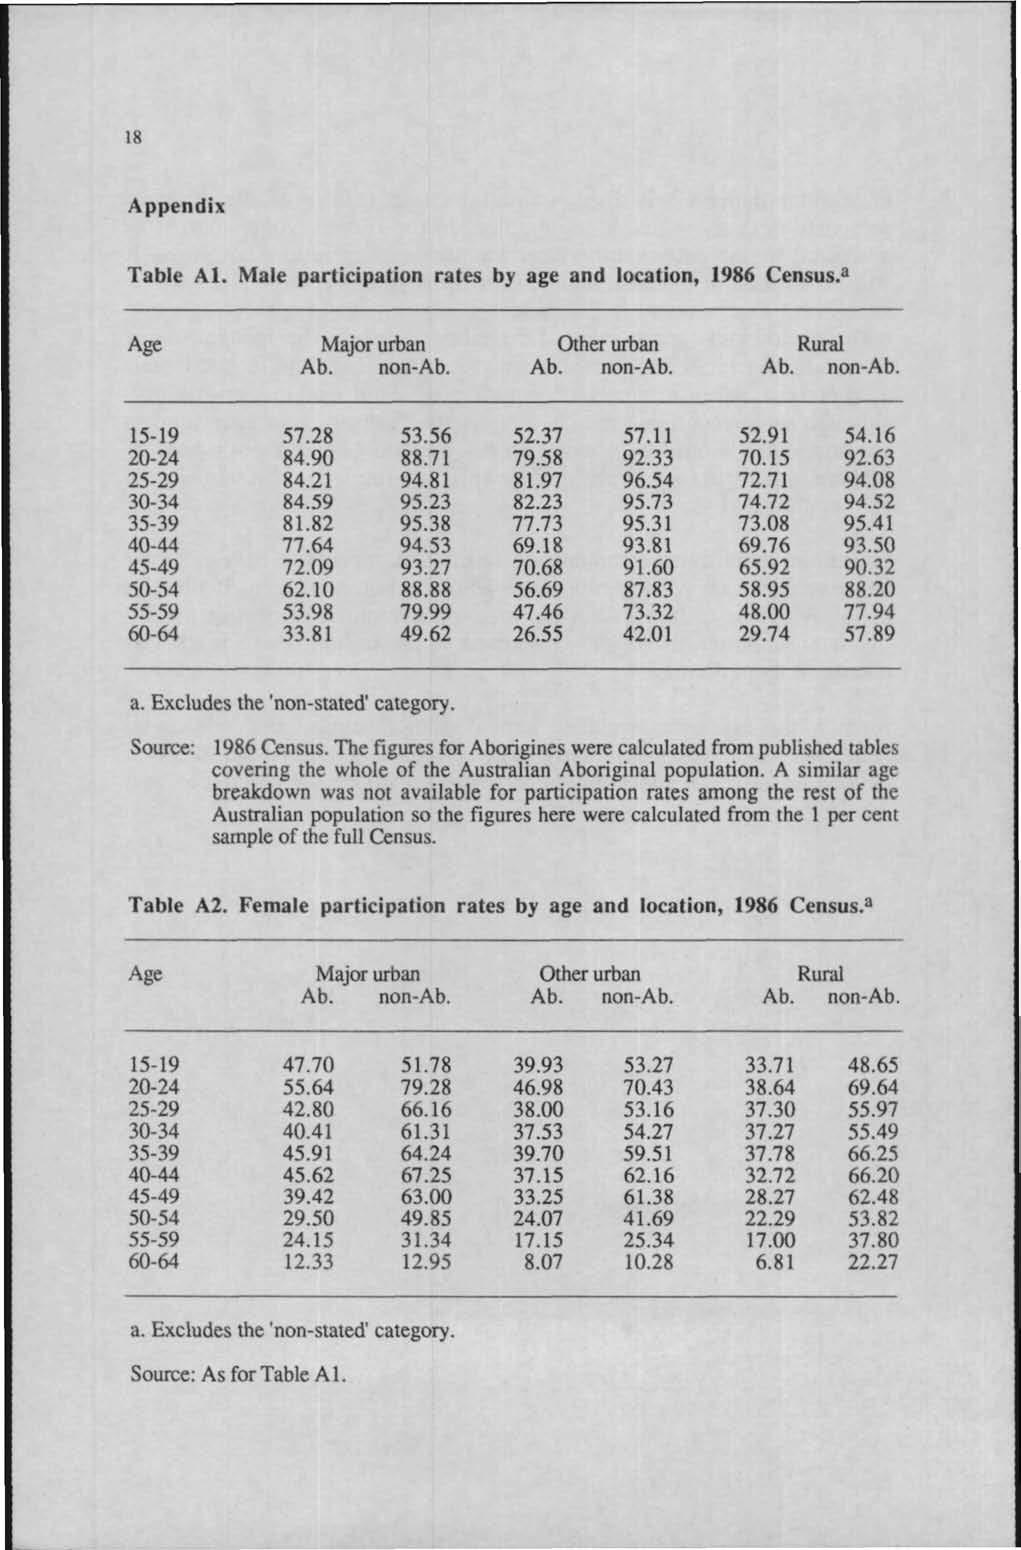 18 Appendix Table AI. Male participation rates by age and location, 1986 Census. 3 Age Major urban Ab. non-ab. Other urban Ab. non-ab. Rural Ab. non-ab. 15-19 20-24 25-29 30-34 35-39 40-44 45-49 50-54 55-59 60-64 57.